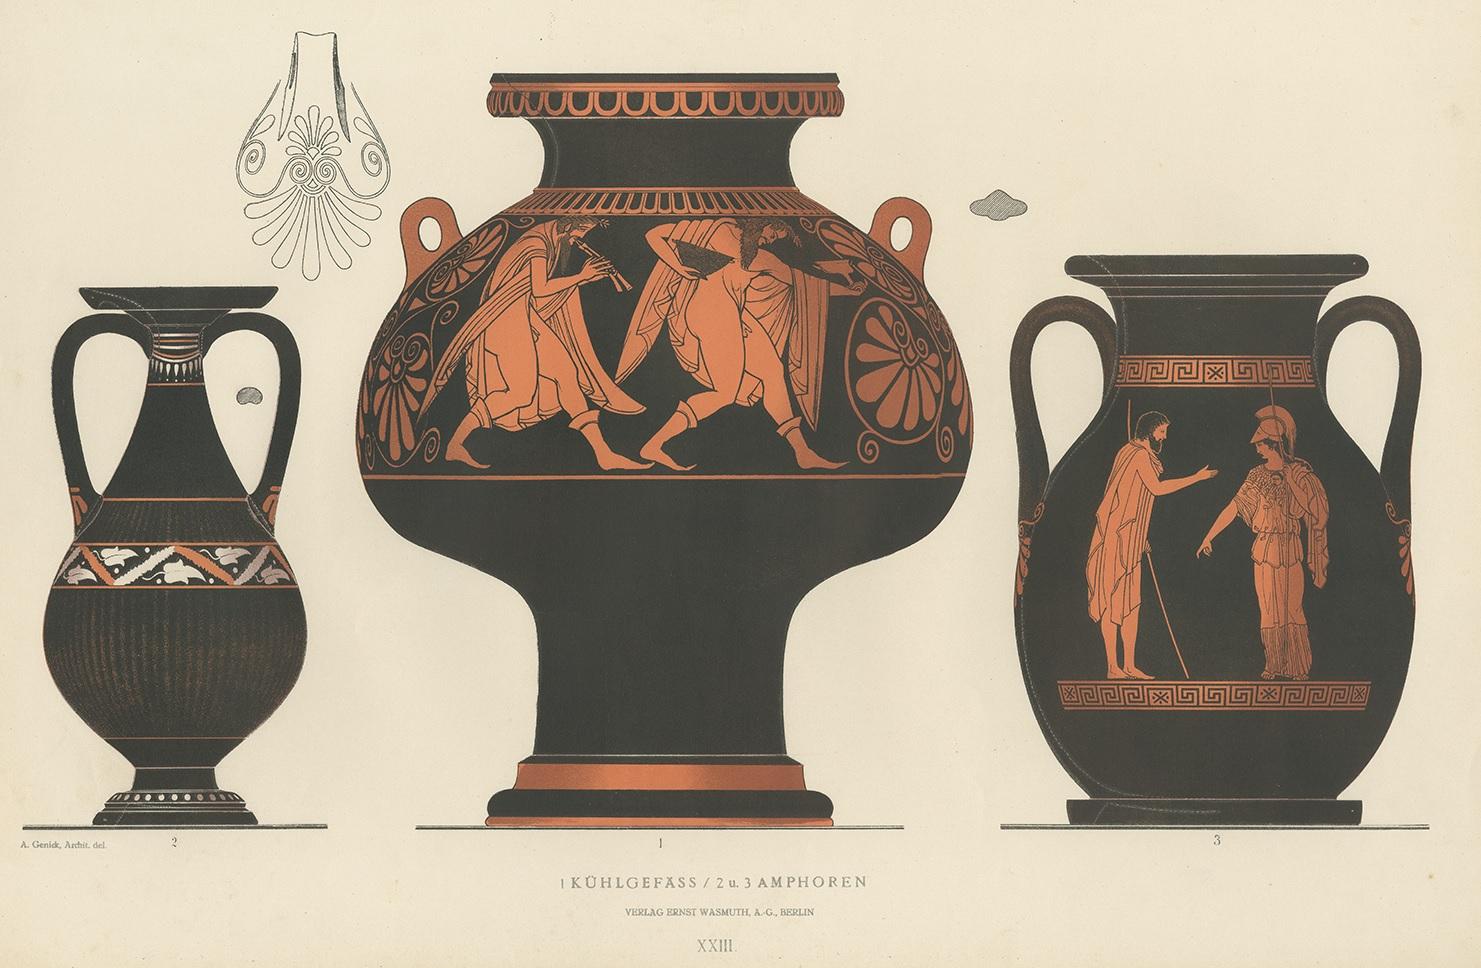 Antique print titled 'Kühlgefäss, Amphoren'. Color-printed large lithograph by Ernst Wasmuth depicting a Greek cooling vessel and two Greek amphorae. This print originates from 'Griechische Keramik' by A. Genick. Albert Genick, an architect by